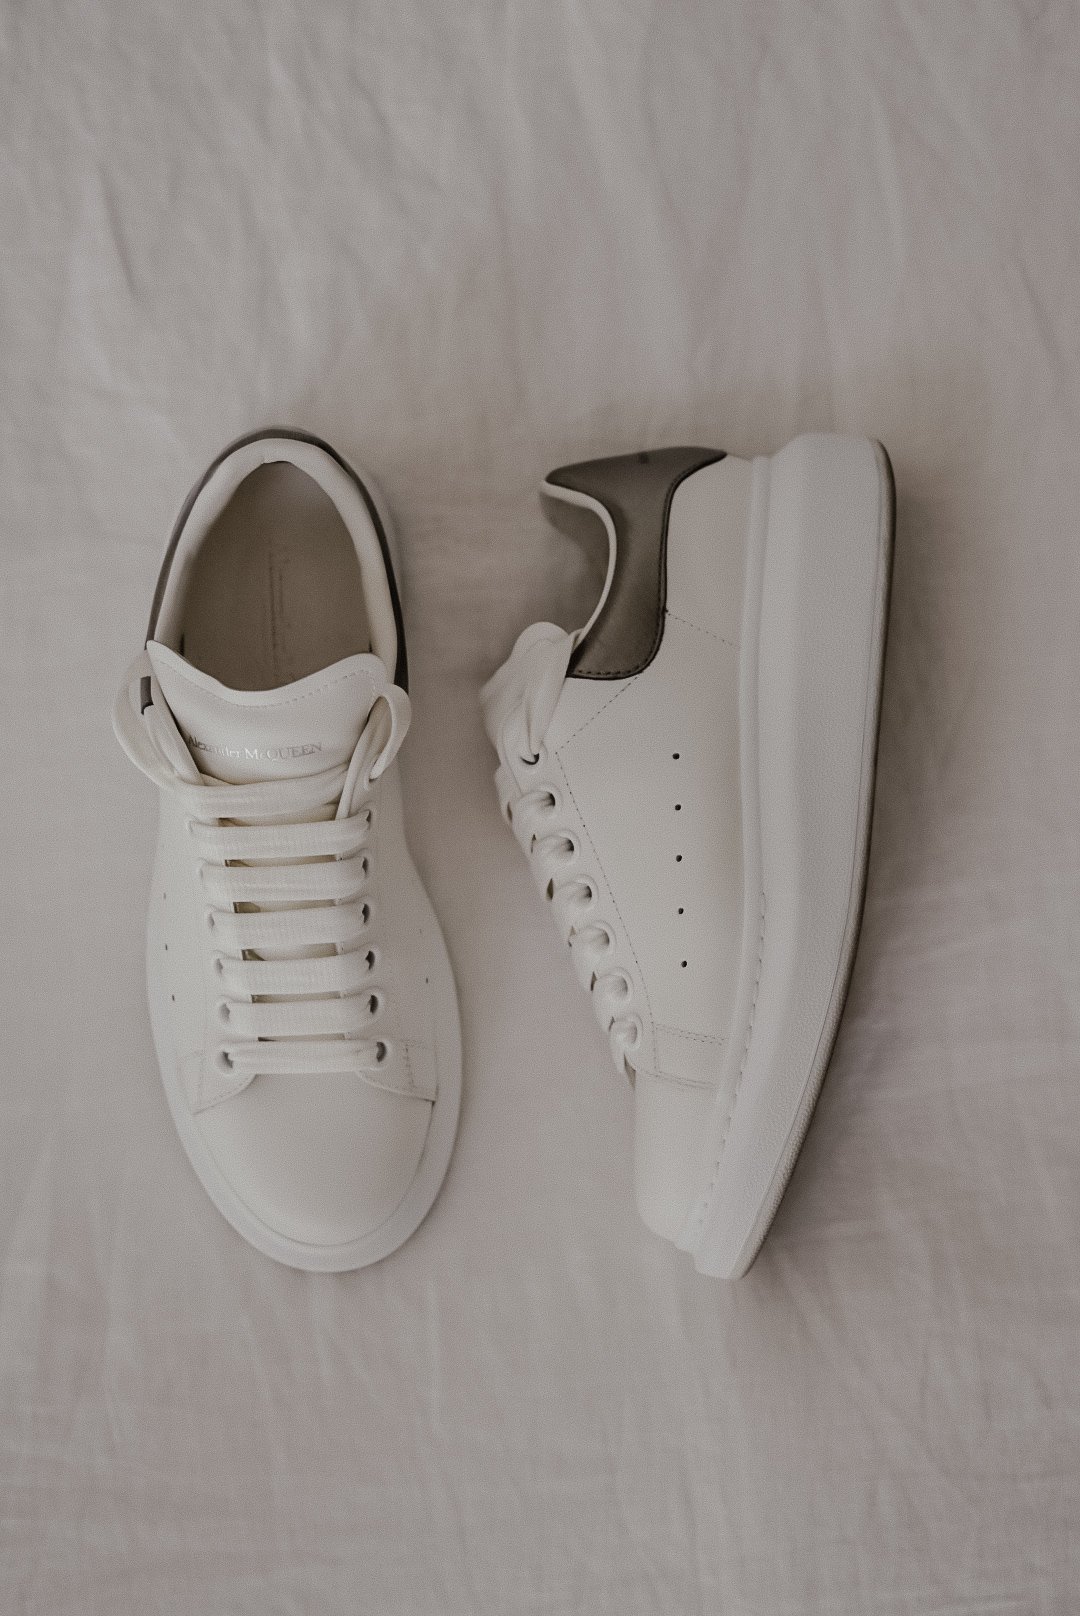 Stationair Boekwinkel leven Alexander McQueen Sneaker Review | Sustainability, Price, Fit and More! |  Jessica Ashley